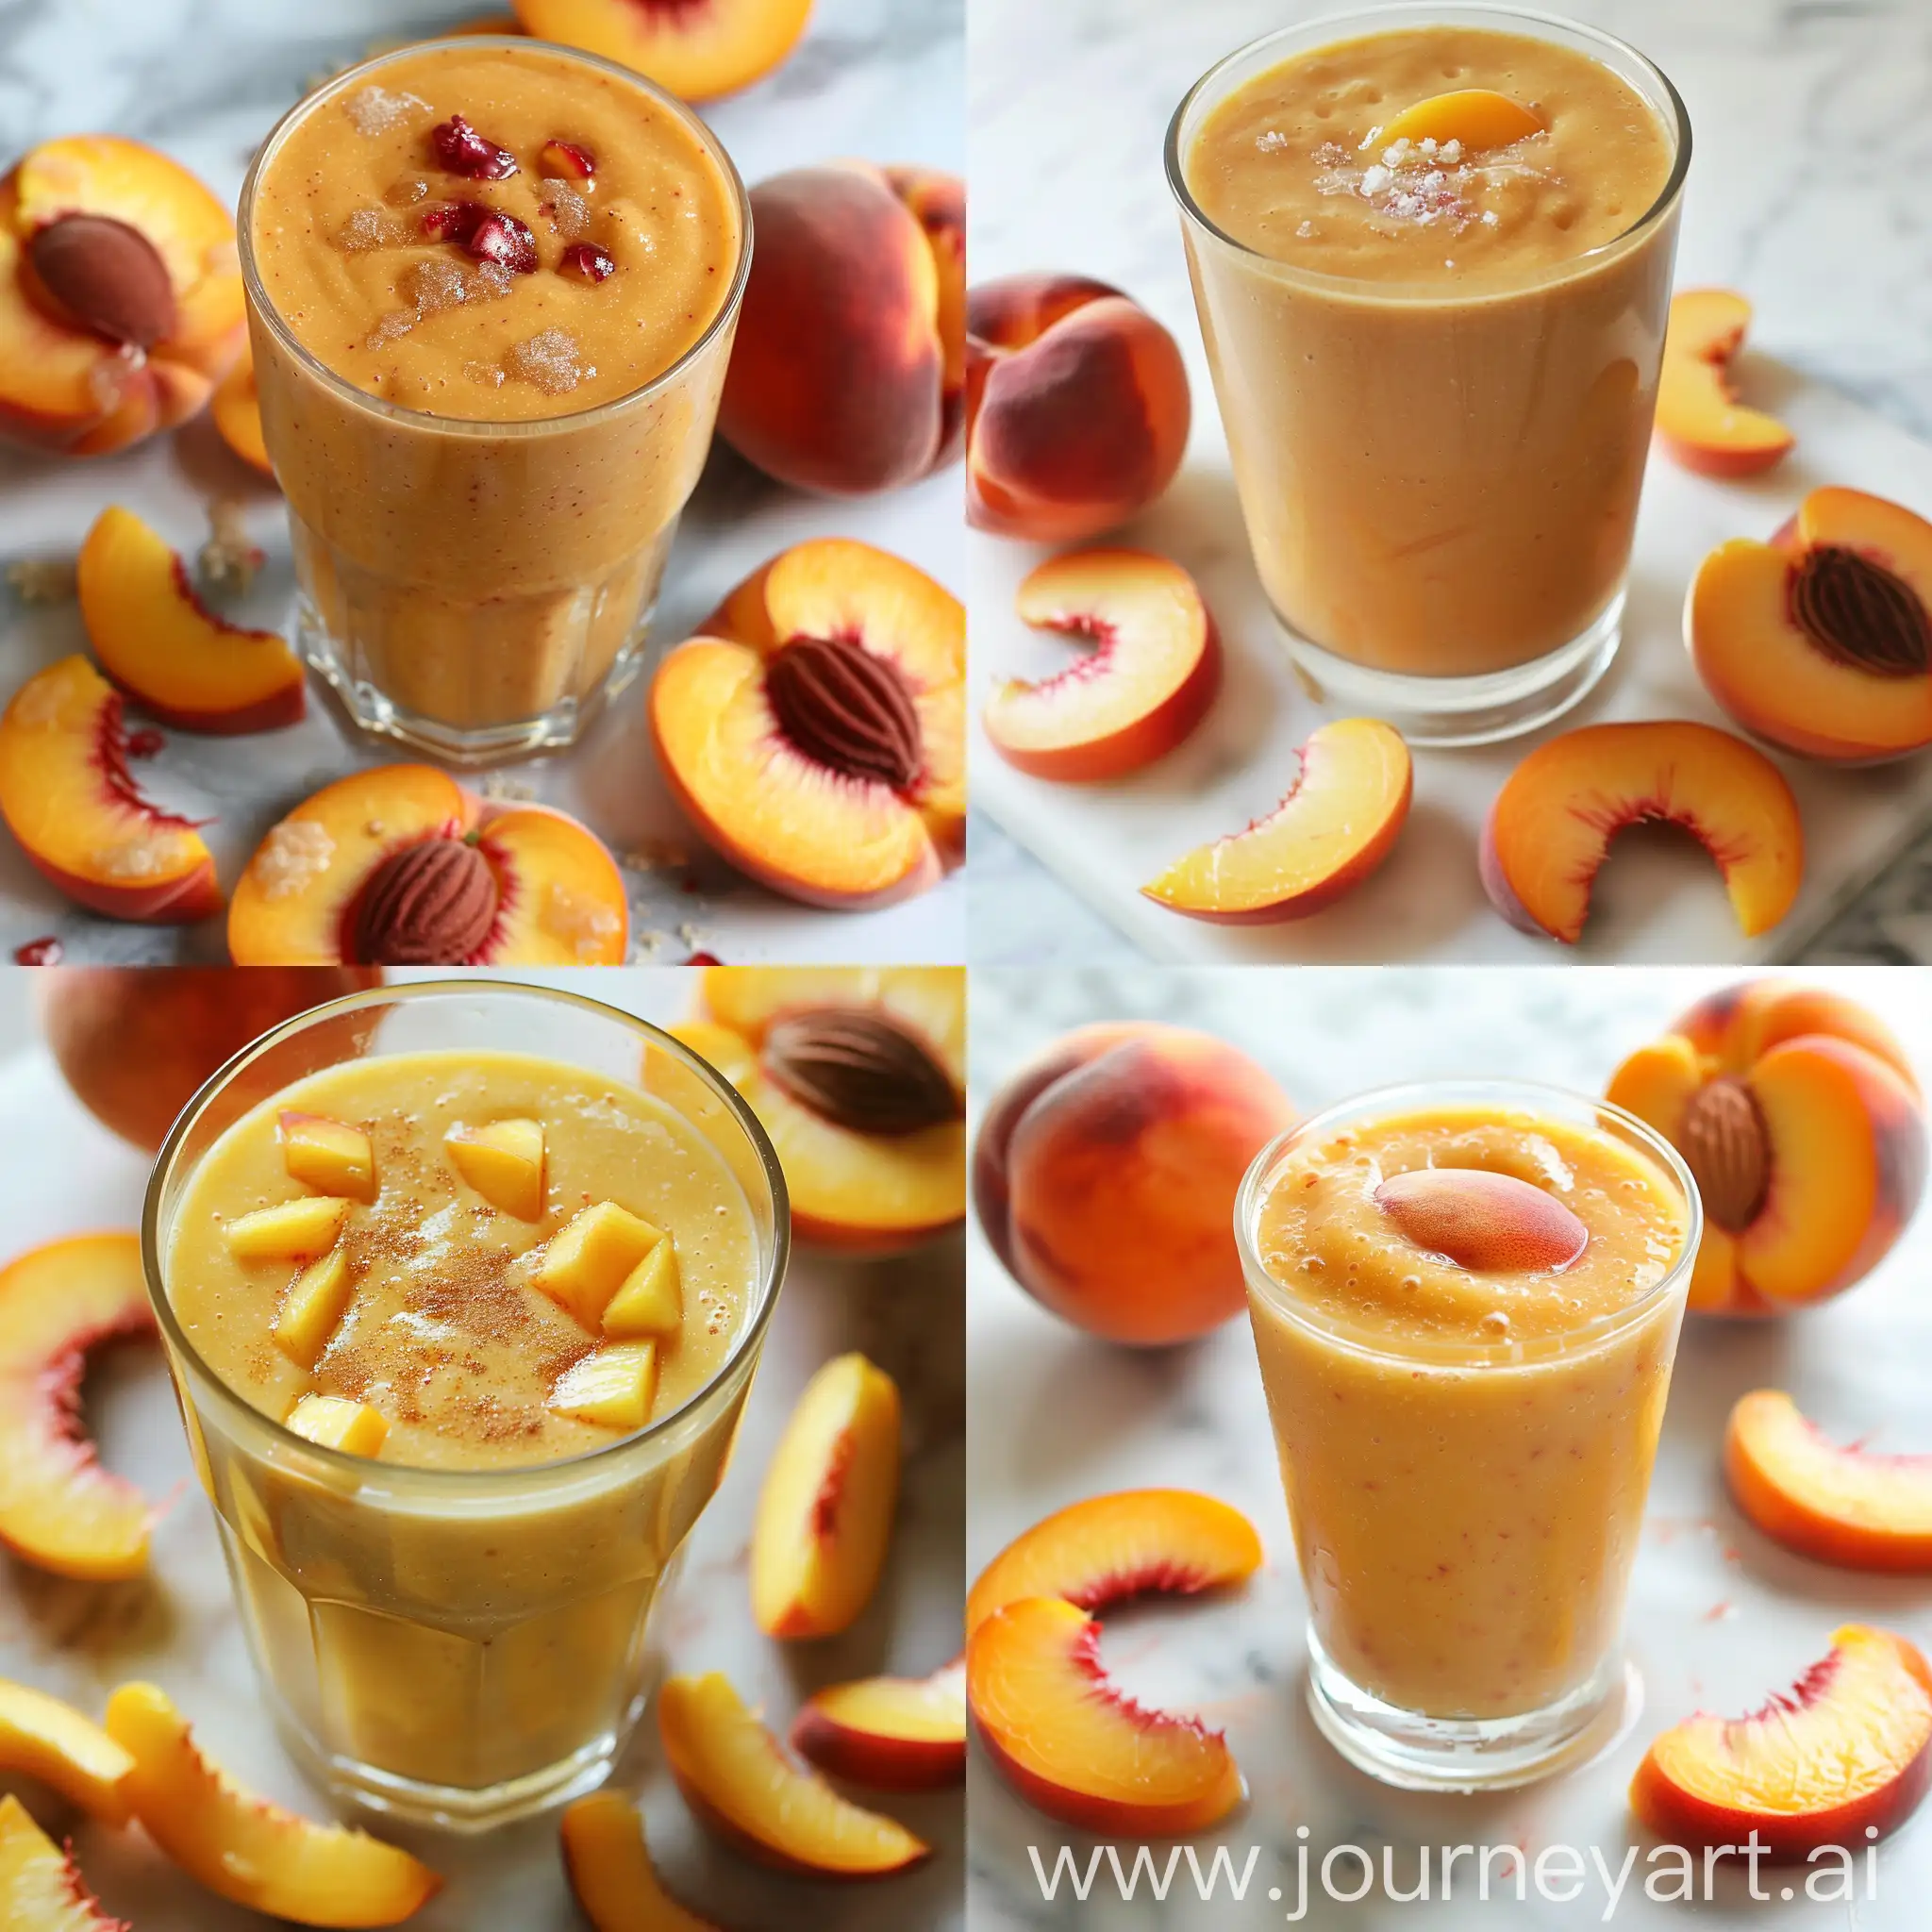 peachcolored smoothie in a glass surrounded by peach slices